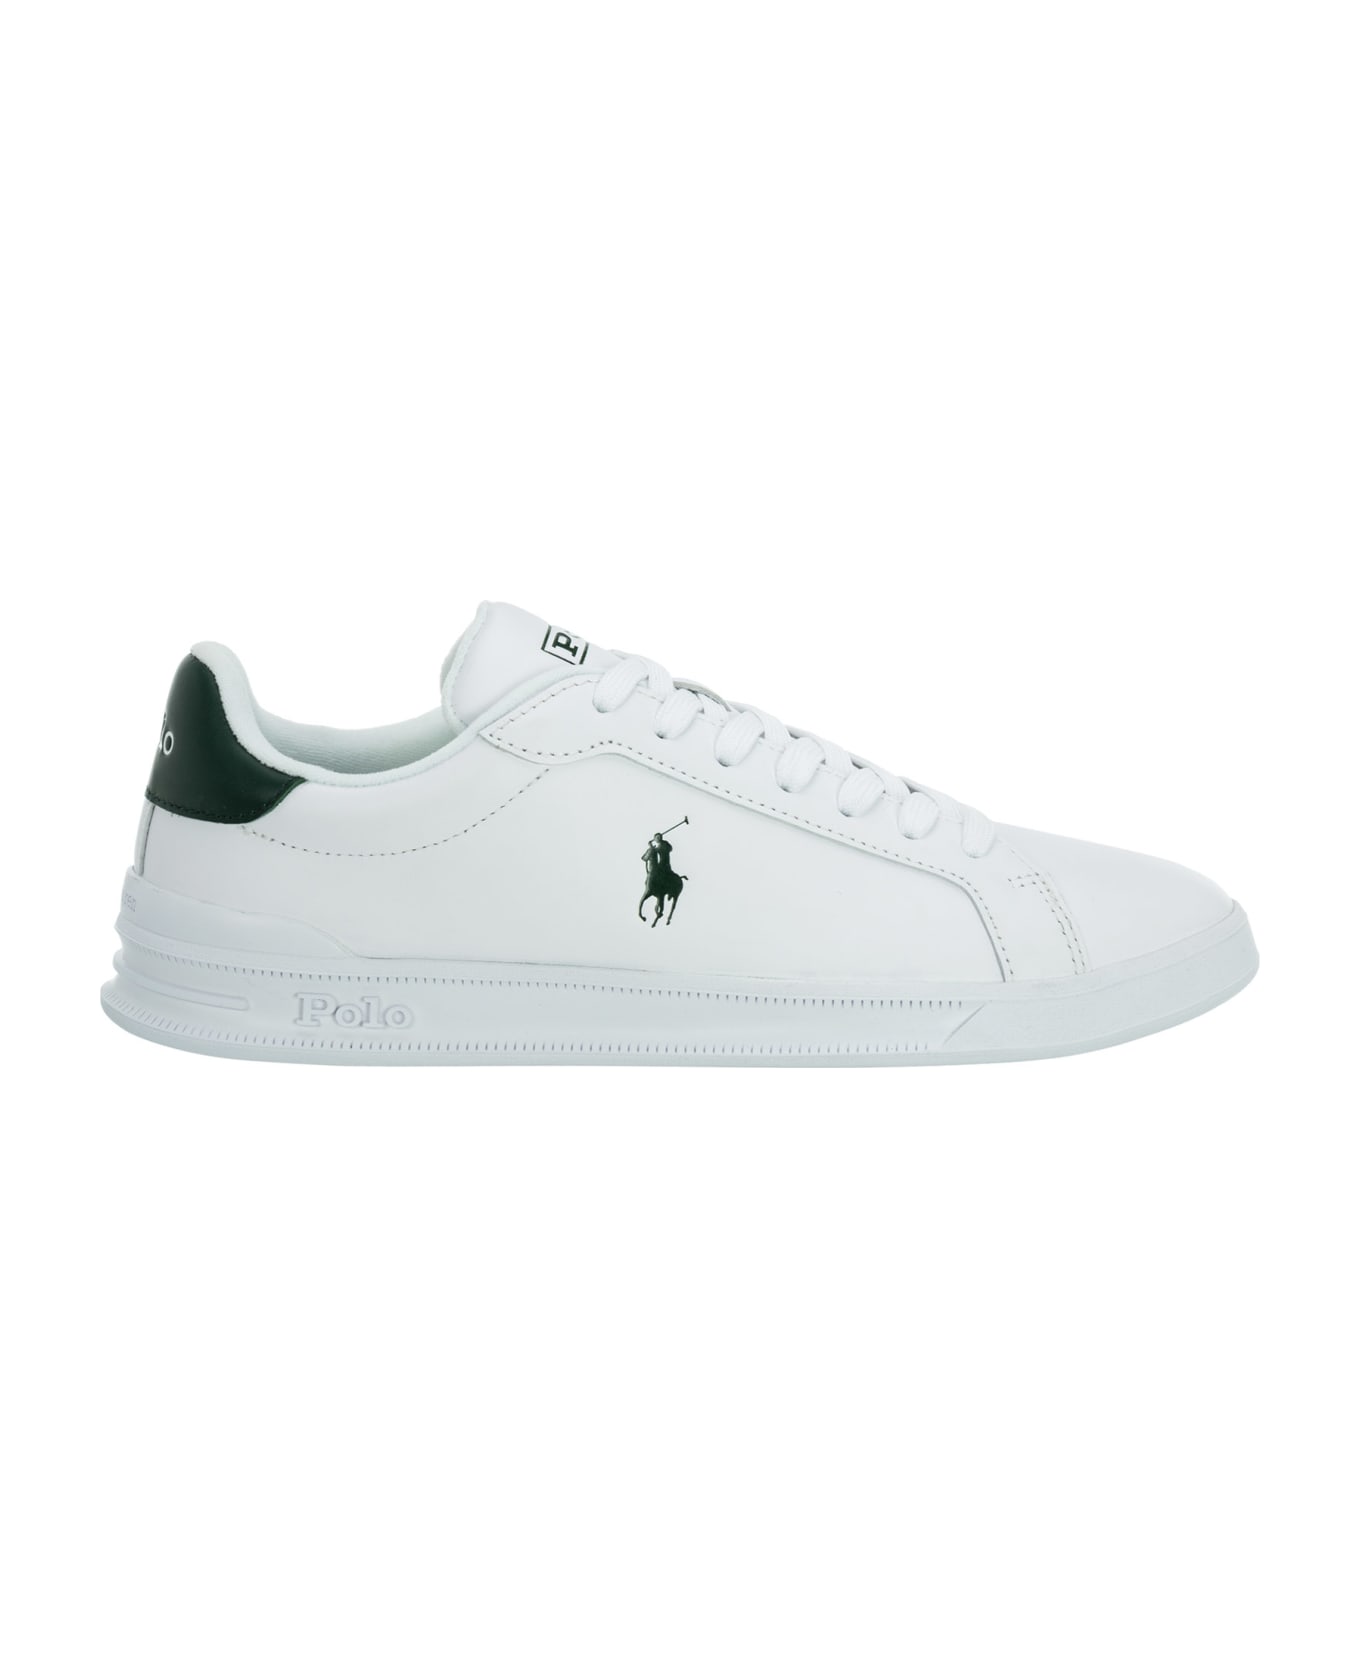 Polo Ralph Lauren Court Ii Heritage Leather Sneakers - White/green スニーカー